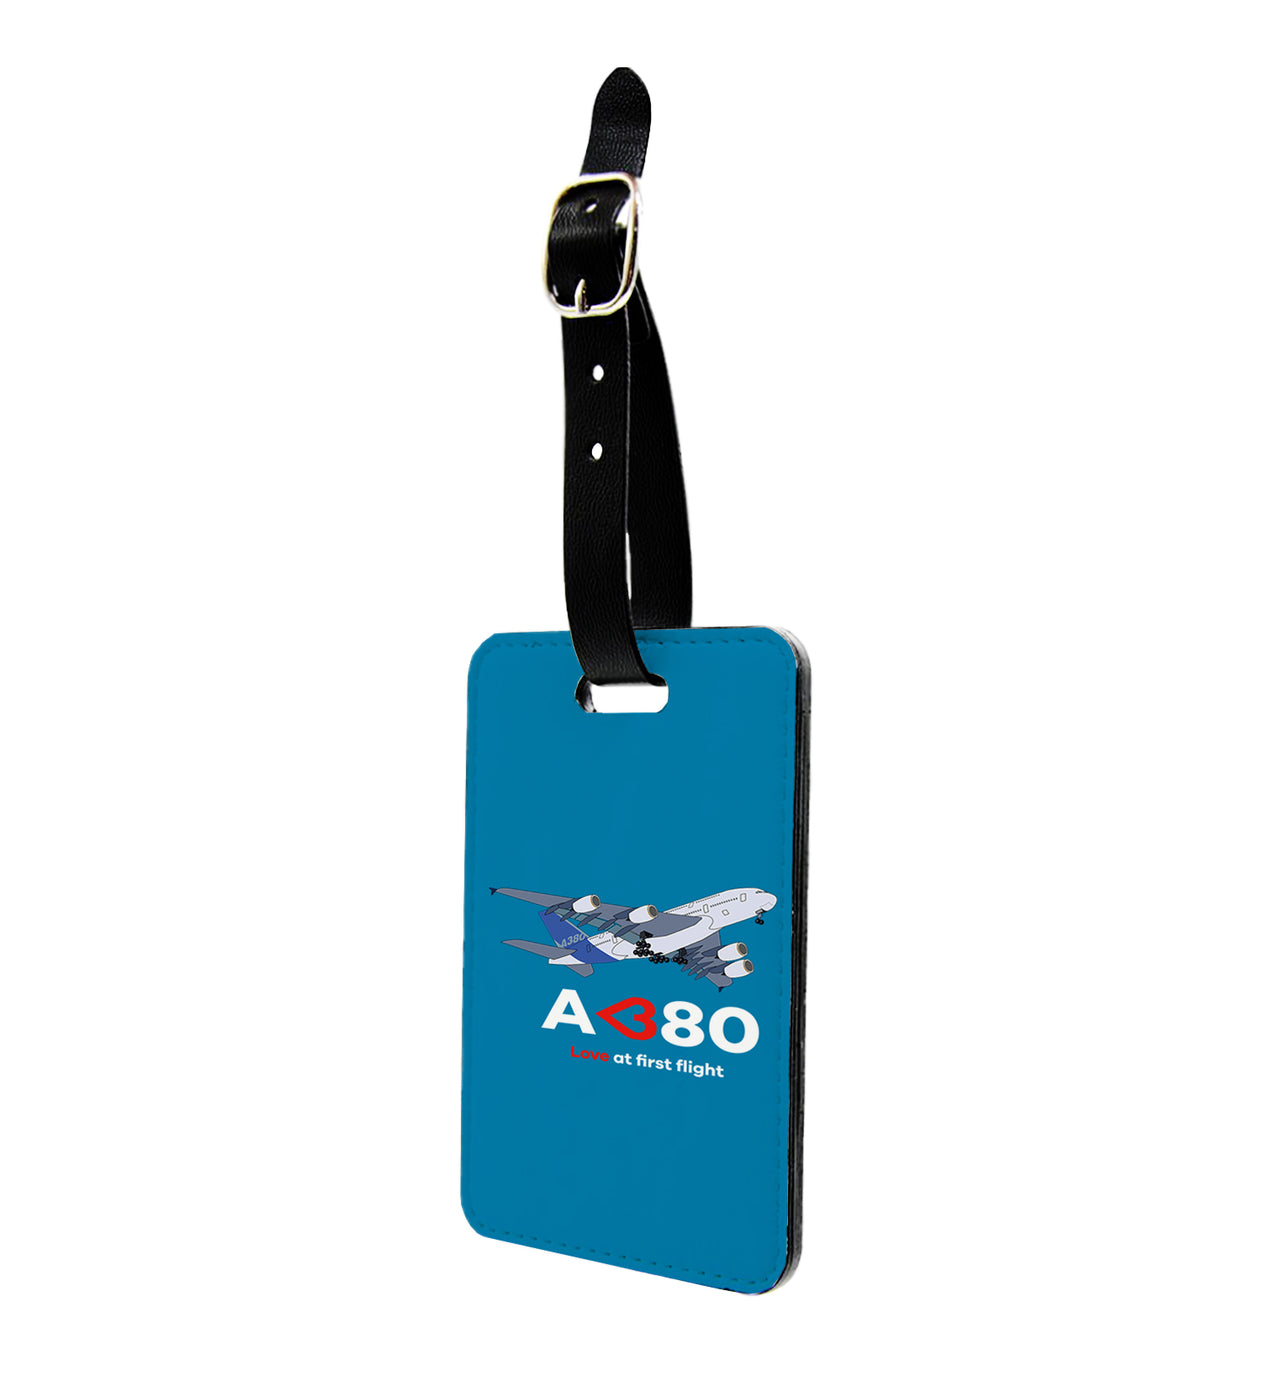 Airbus A380 Love at first flight Designed Luggage Tag